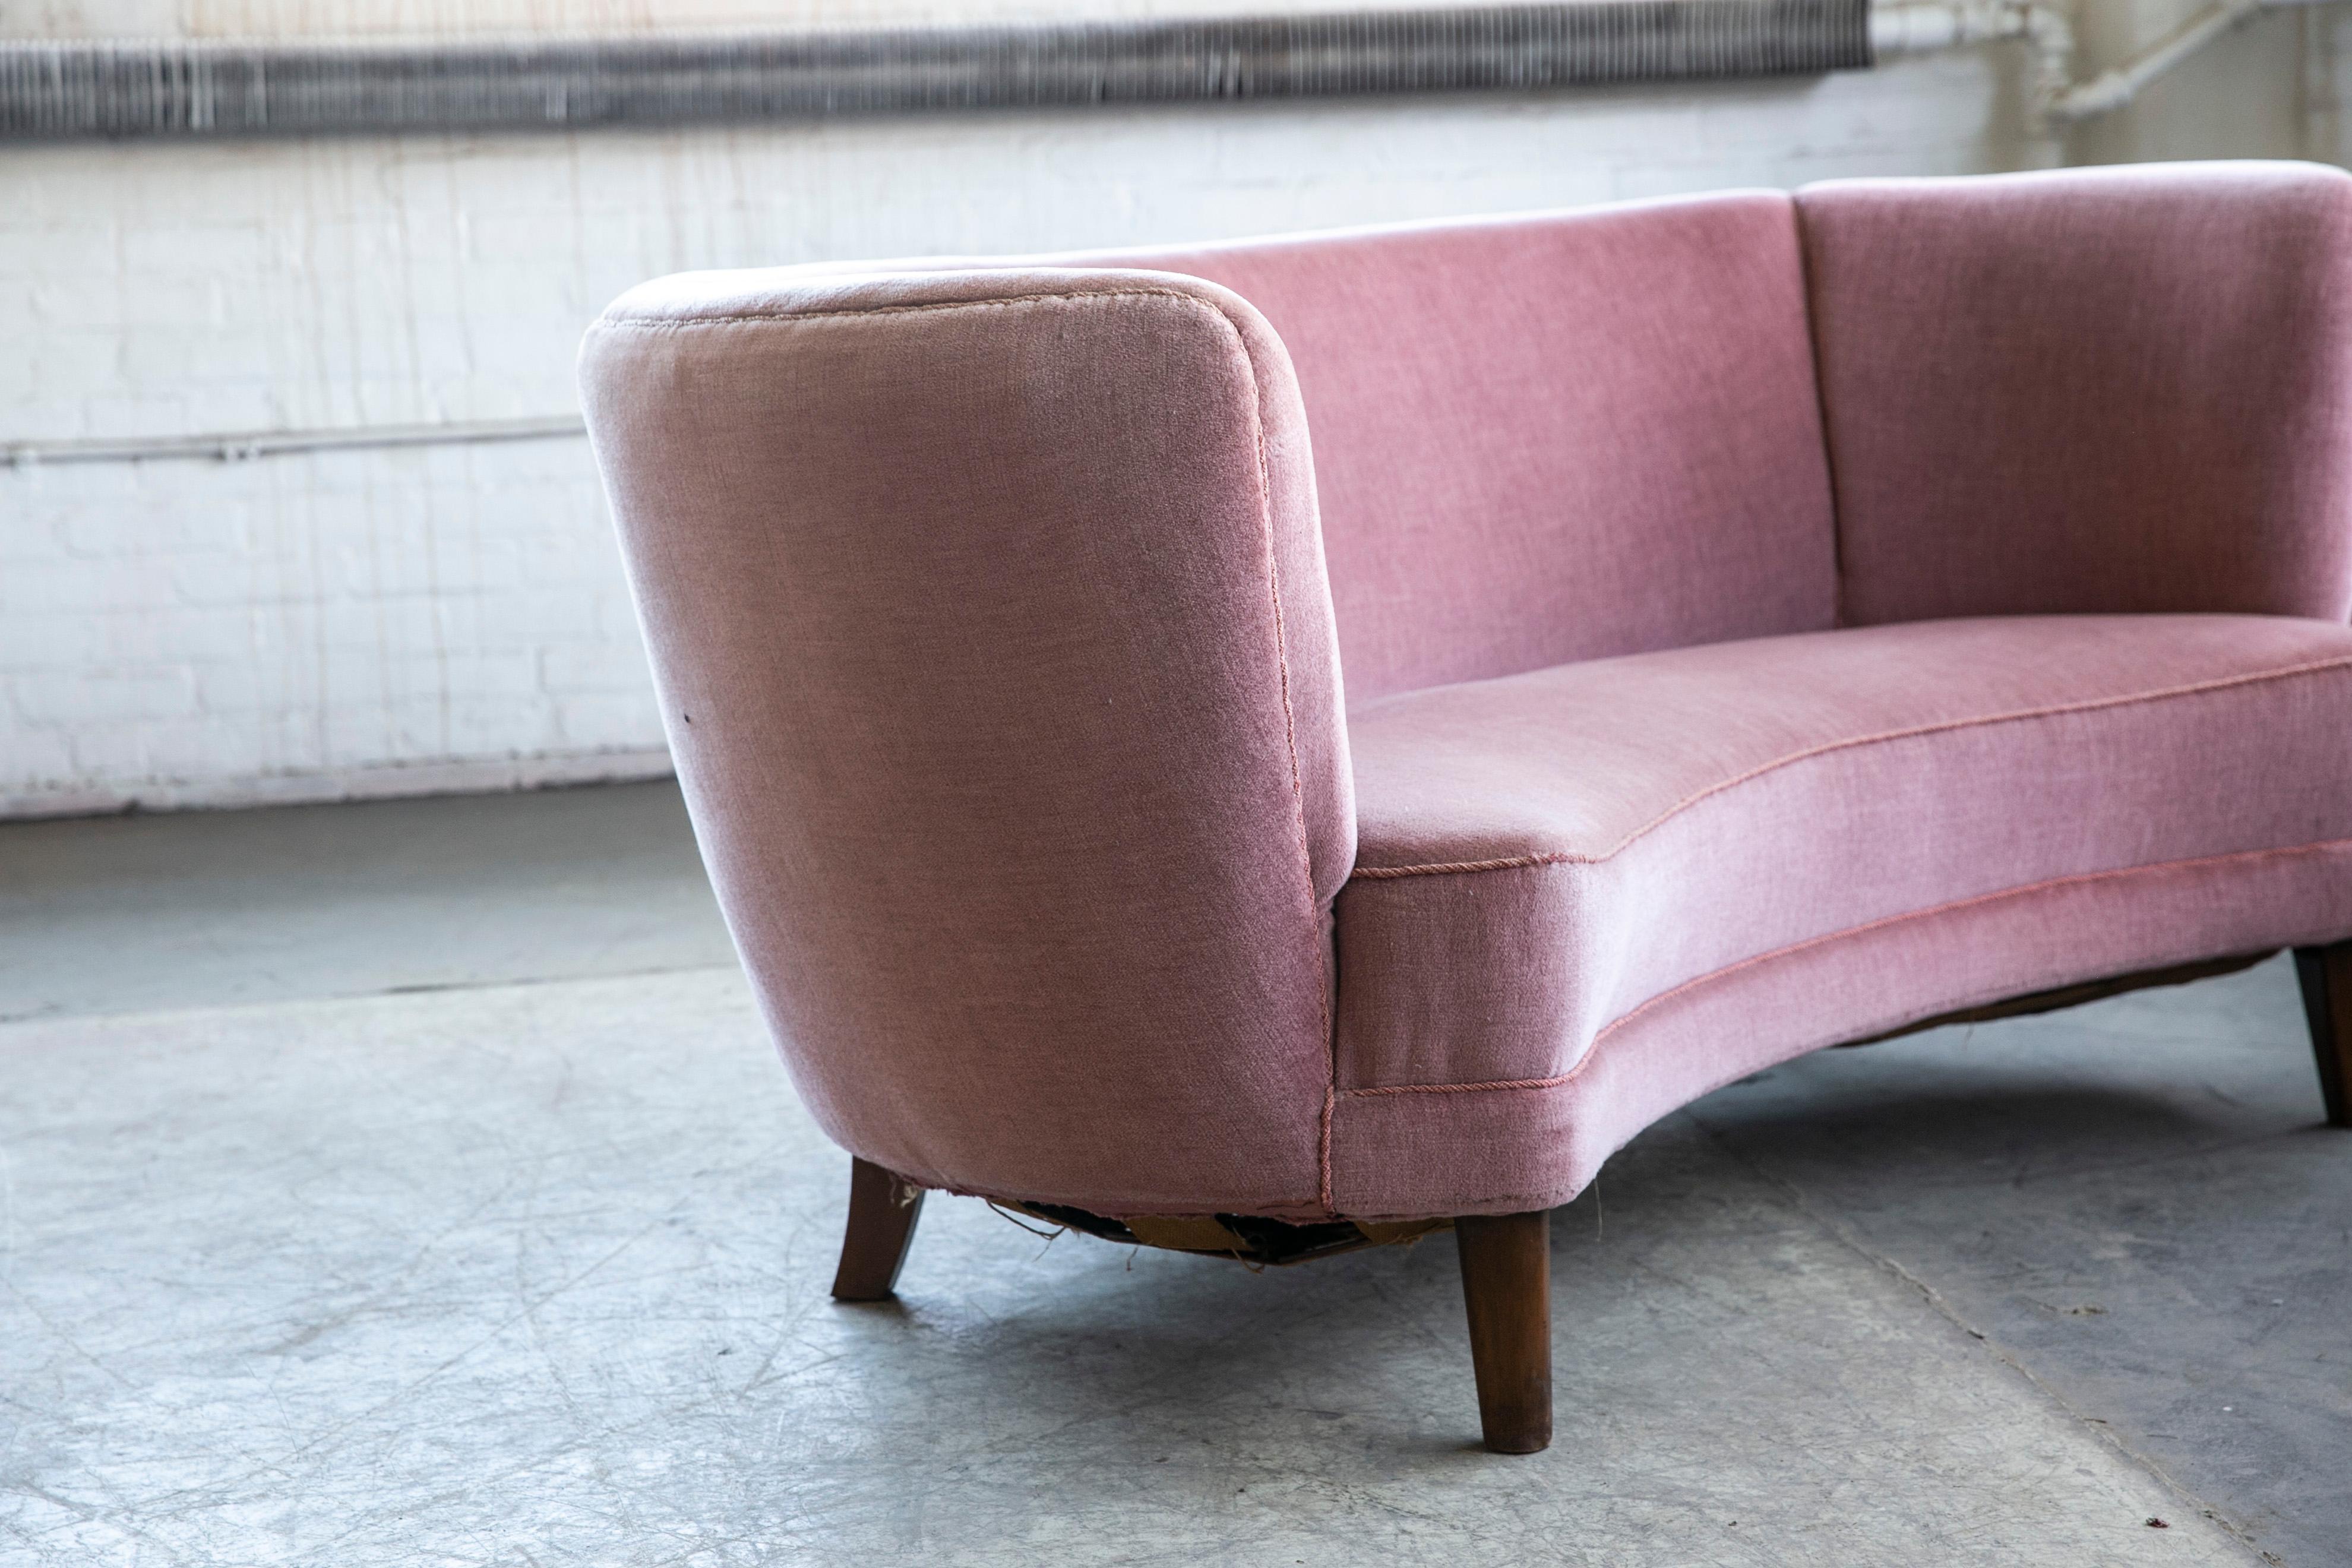 Beech Danish 1940s Boesen Style Banana Form Curved Sofa or Loveseat in Pink Mohair